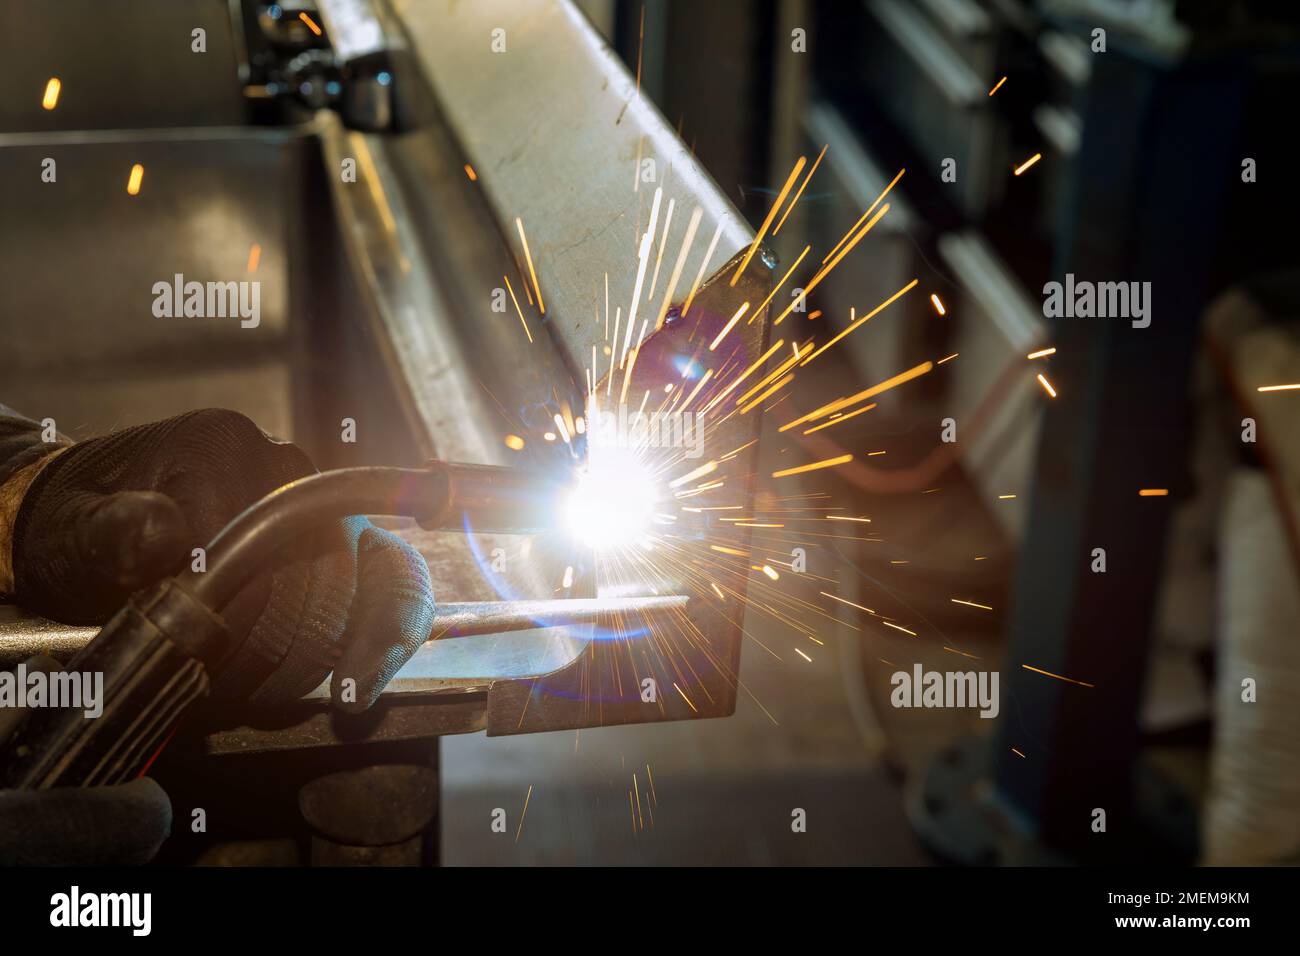 Worker is welding with semi-automatic argon gas shielded welding machine on metal that has sparkles in it Stock Photo